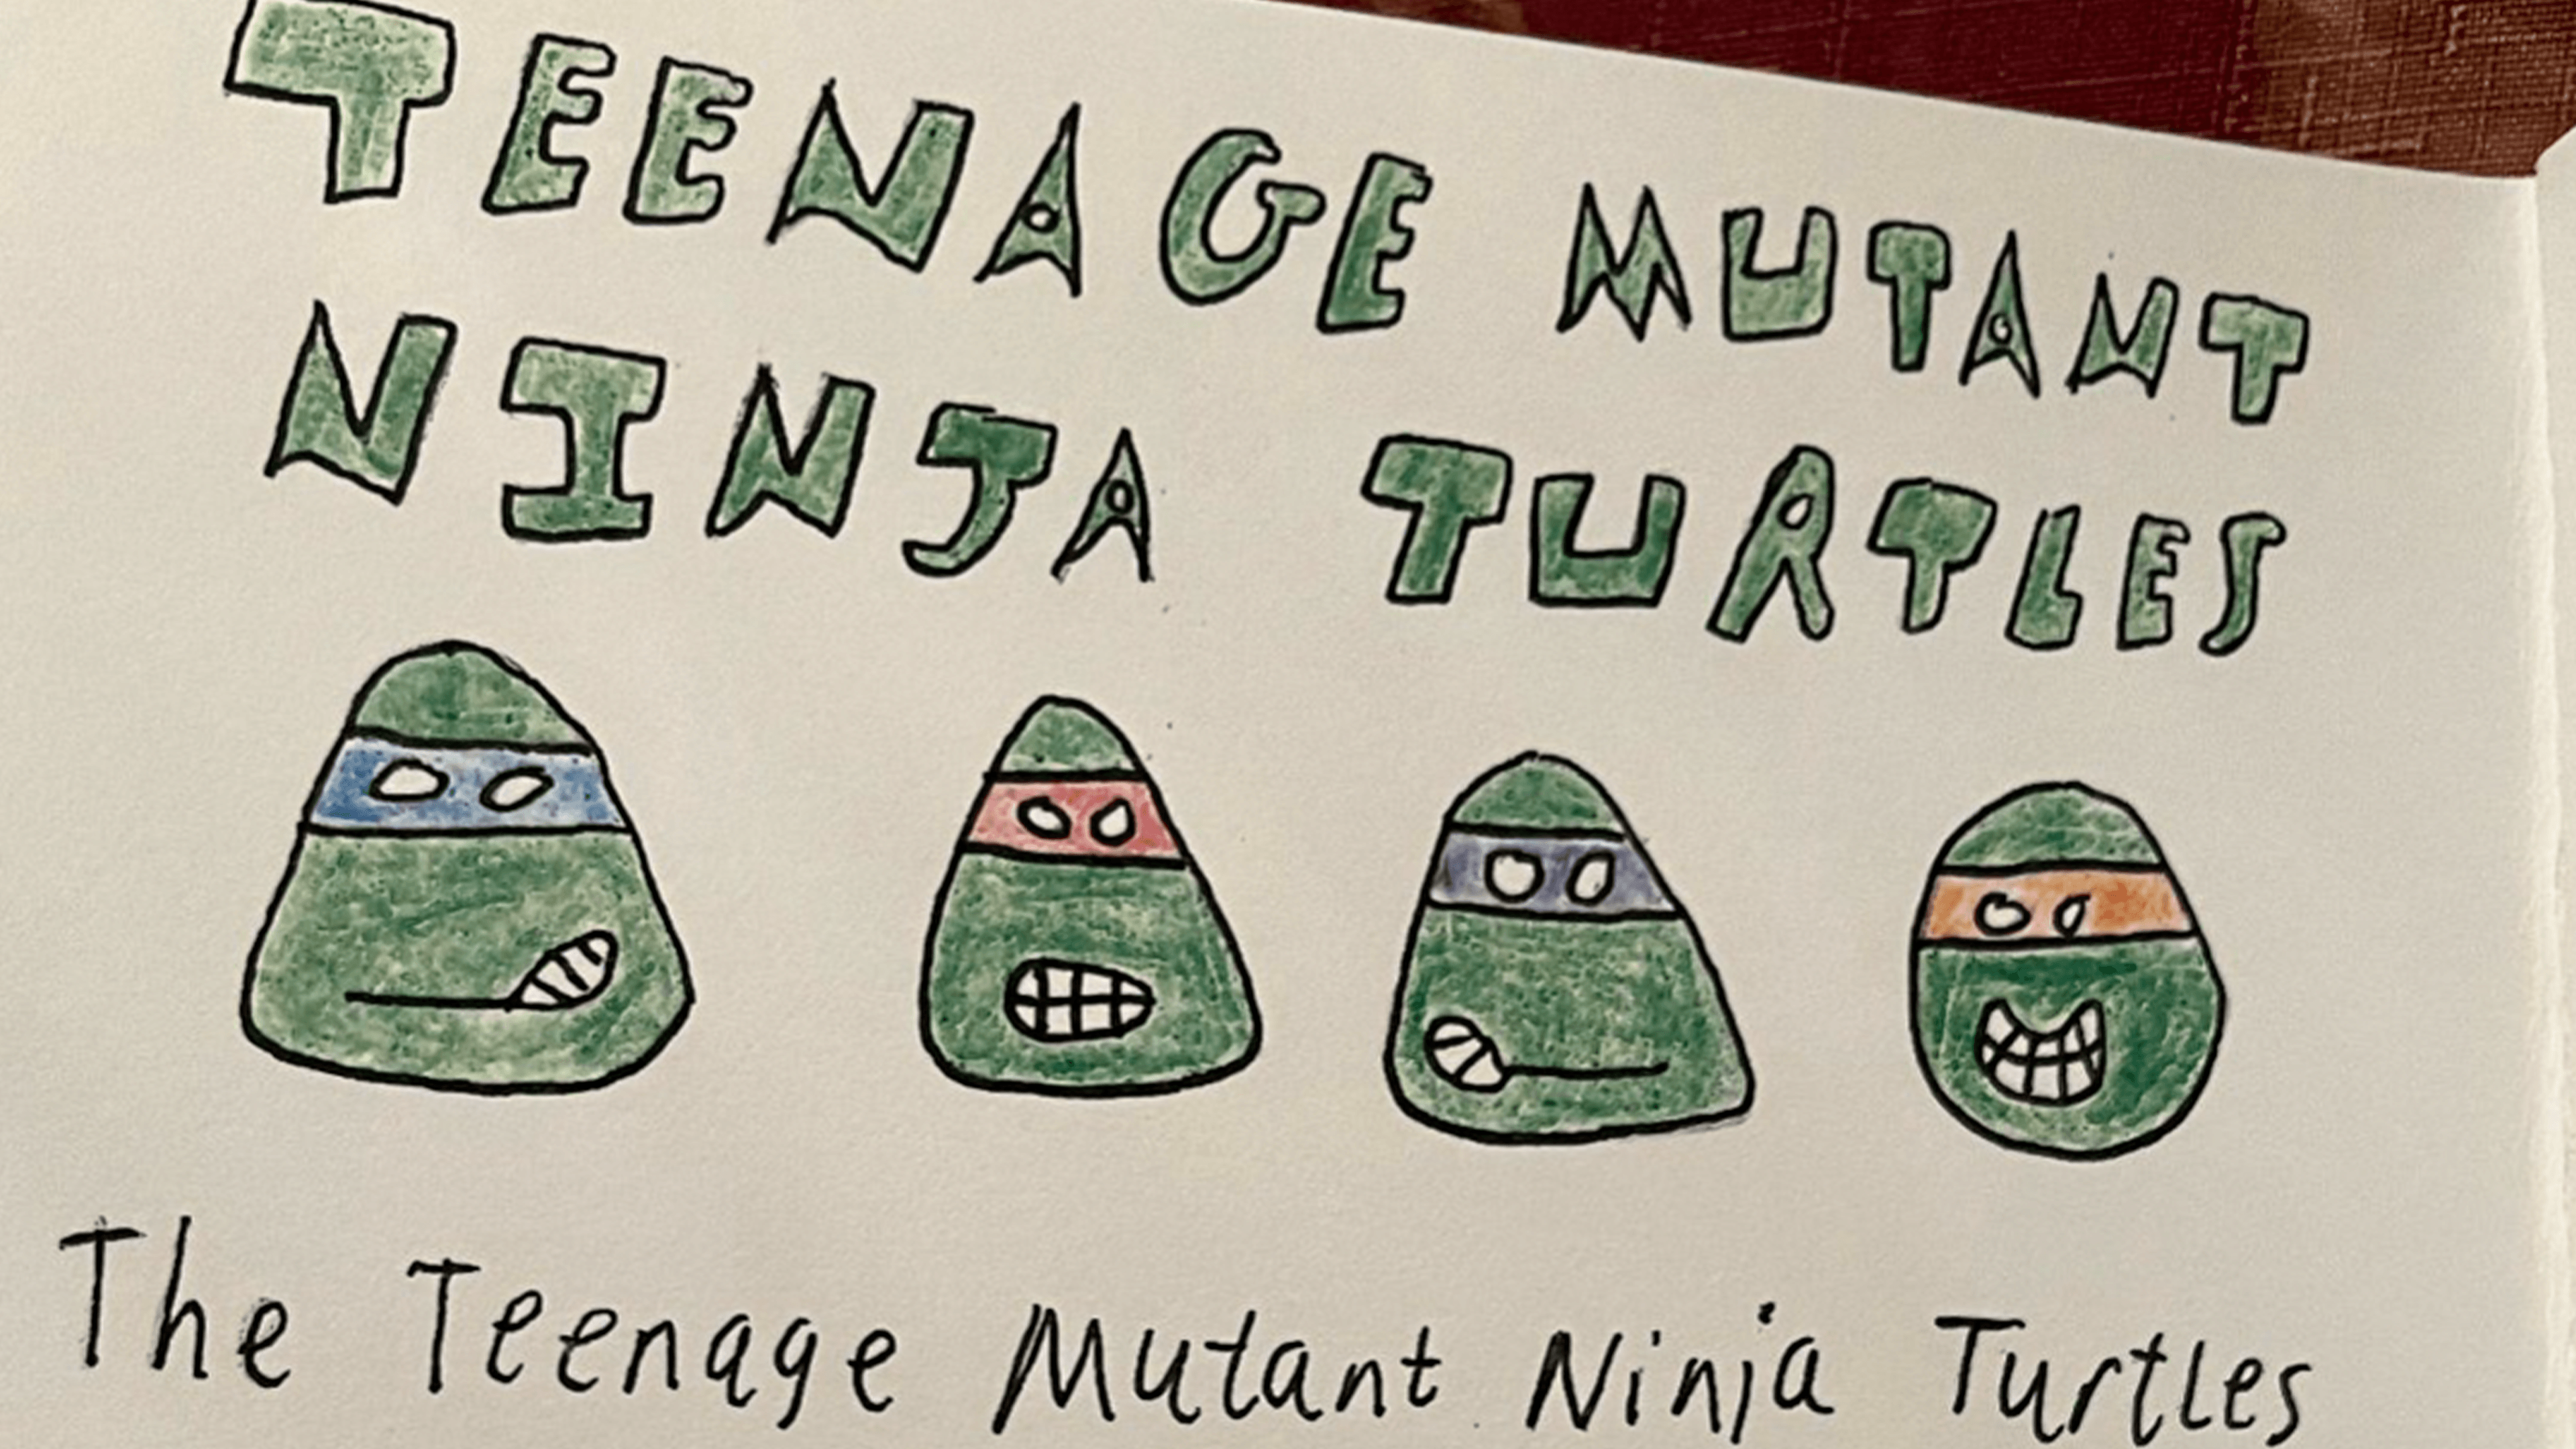 first page of tyler's zine, depicting a drawing of the 4 teenage mutant ninja turtles' heads and the text "teenage mutant ninja turtles"